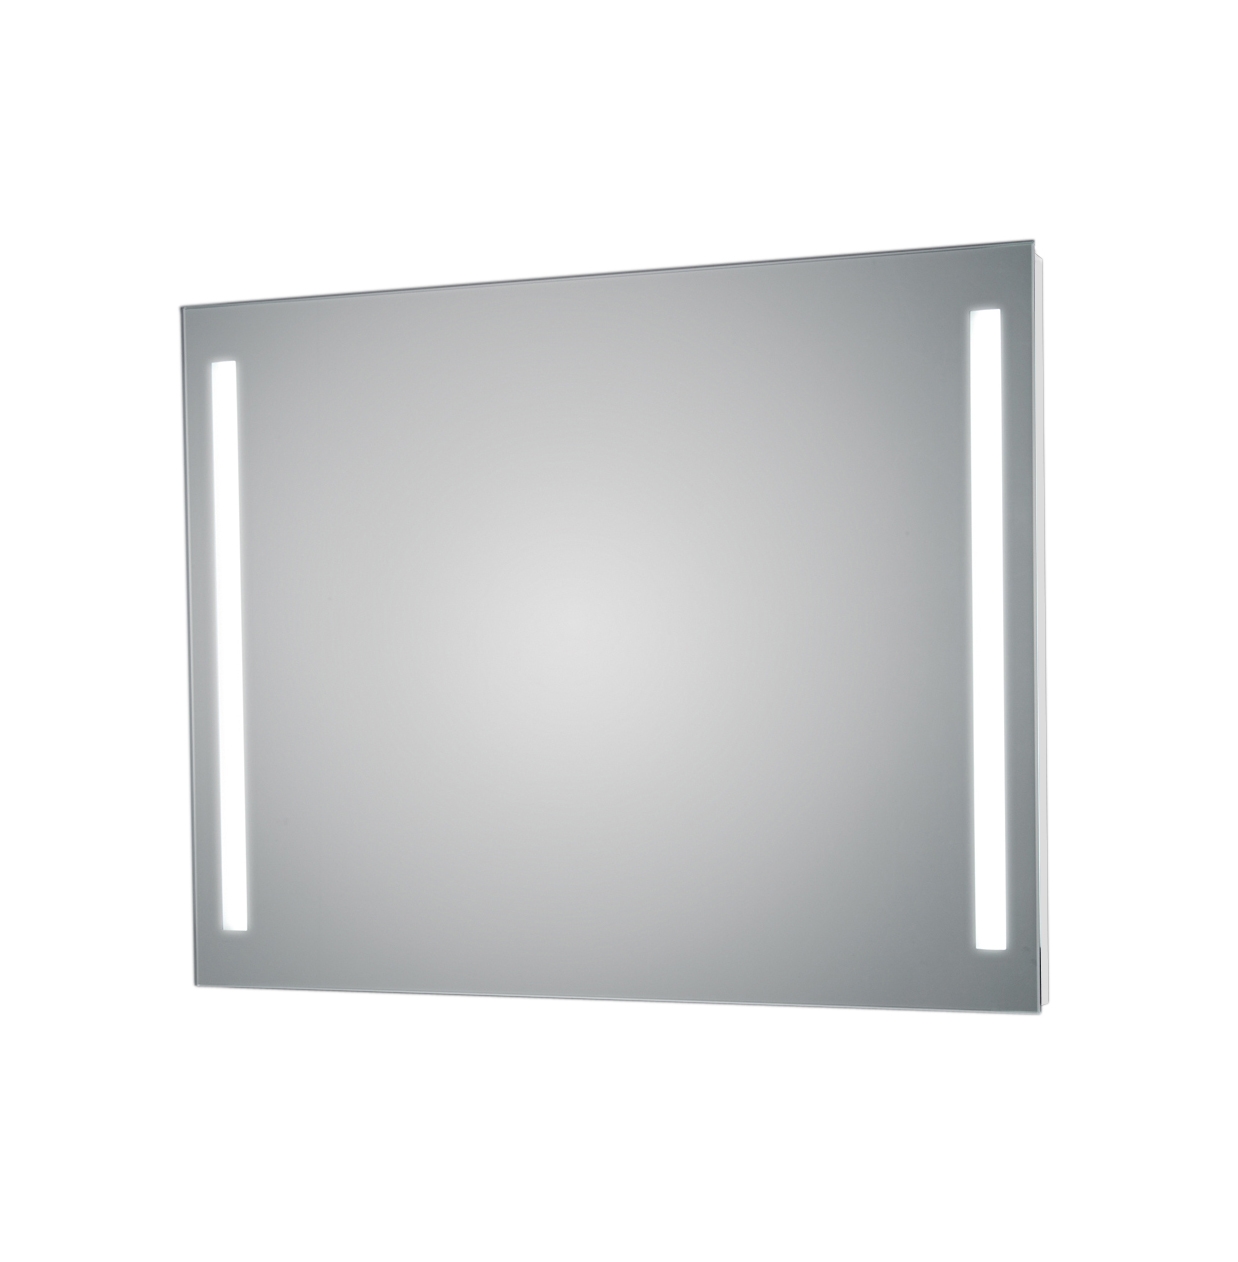 T5-2 mirror with LED light 47.2 x 31.4